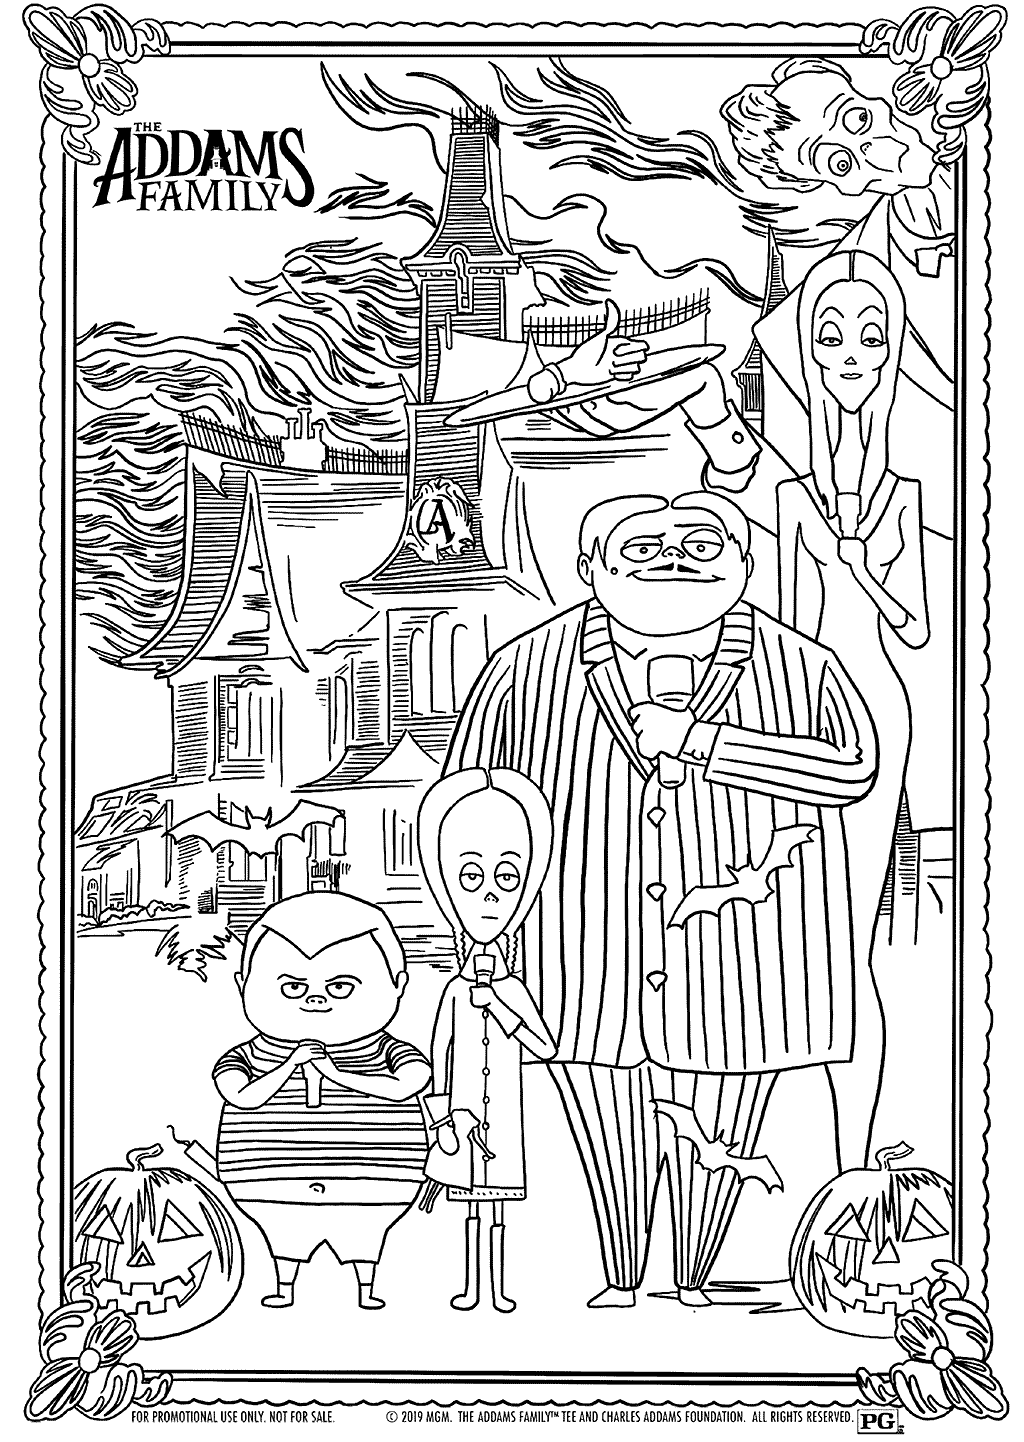 The Addams Family - Halloween Adult Coloring Pages